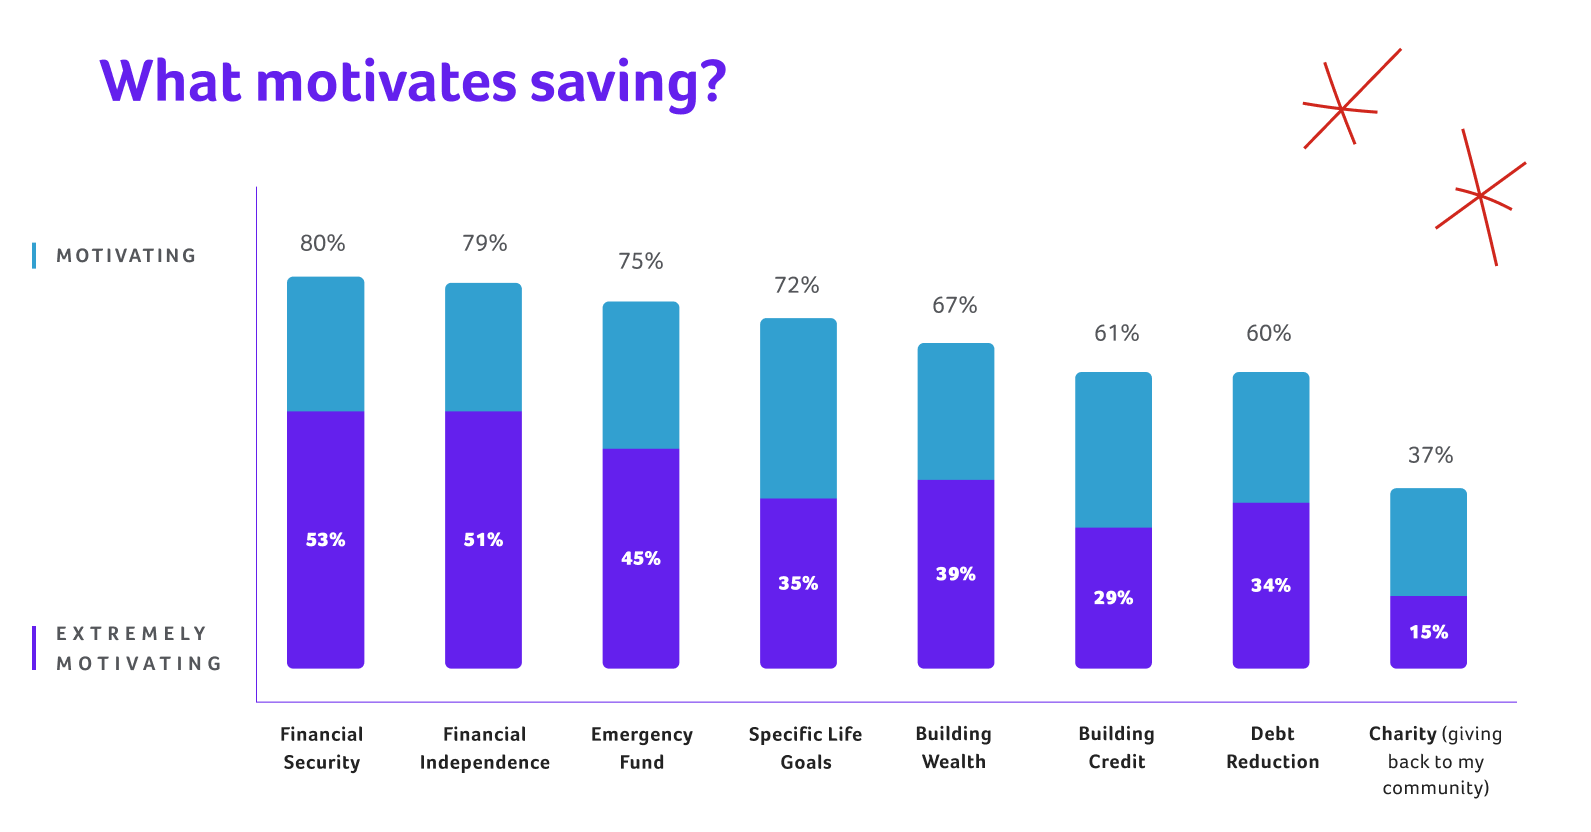 bar chart titled "What motivates saving?" showing percentages comparing motivating vs. extremely motivating. Of people surveyed, 80% say financial security is motivating while 53% say it is extremely motivating. 79% say financial independence is motivating while 51% say it is extremely motivating. 75% say an emergency fund is motivating vs. 45% finding it extremely motivating. 72% say specific life goals are motivating vs. 35% finding them extremely motivating. 67% say building wealth is motivating vs. 39% extremely motivating. 61% say building credit is motivating vs. 29% extremely motivating. 60% say debt reduction is motivating vs. 34% extremely motivating. And 37% find charity (giving back to my community) is motivating vs. 15% extremely motivating.